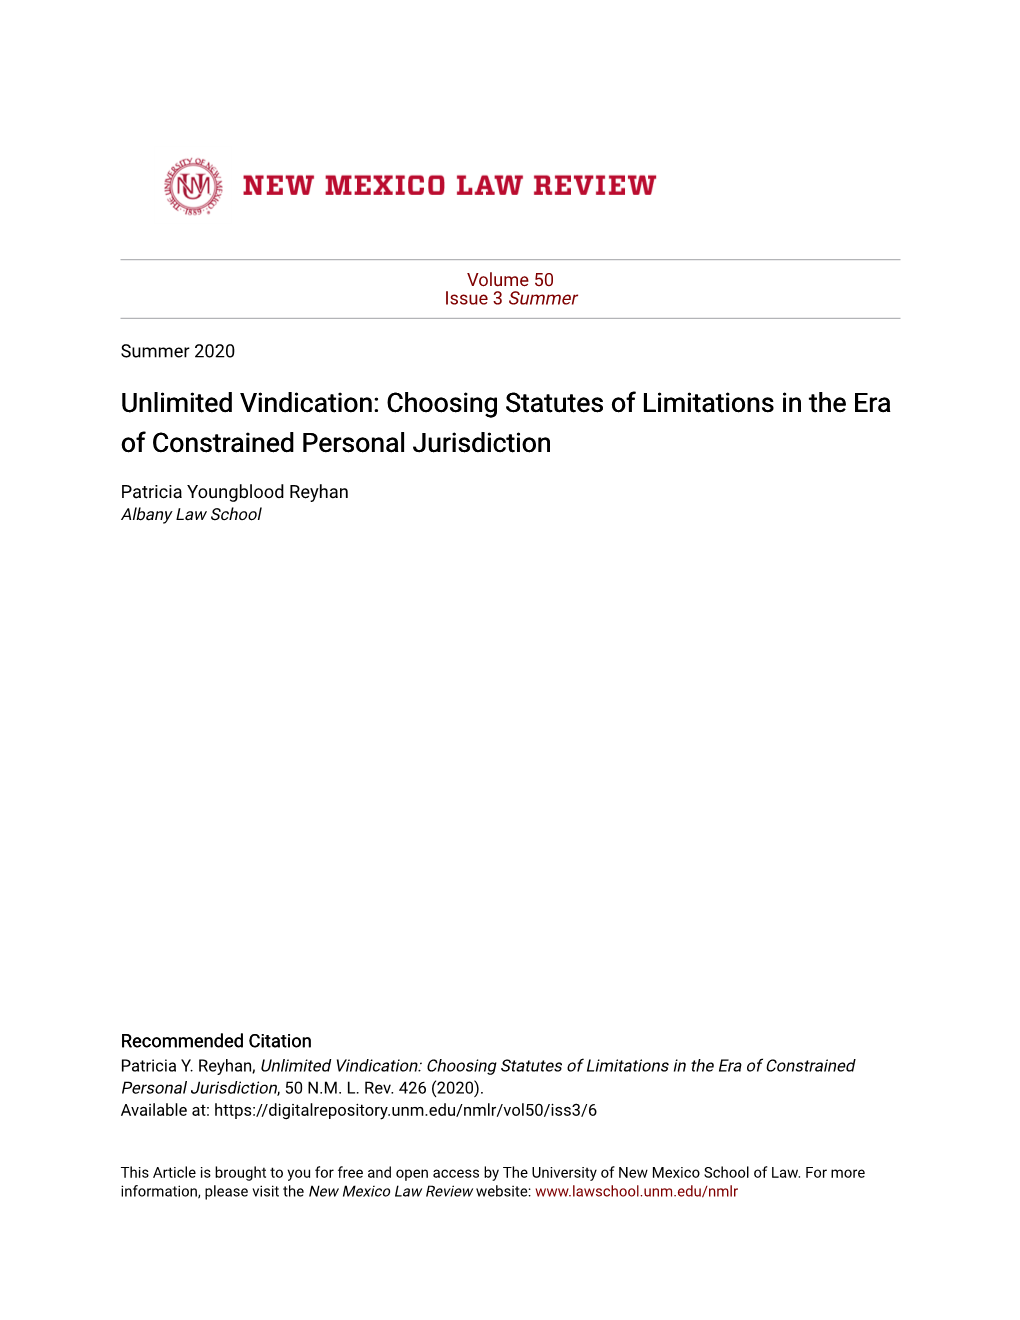 Choosing Statutes of Limitations in the Era of Constrained Personal Jurisdiction